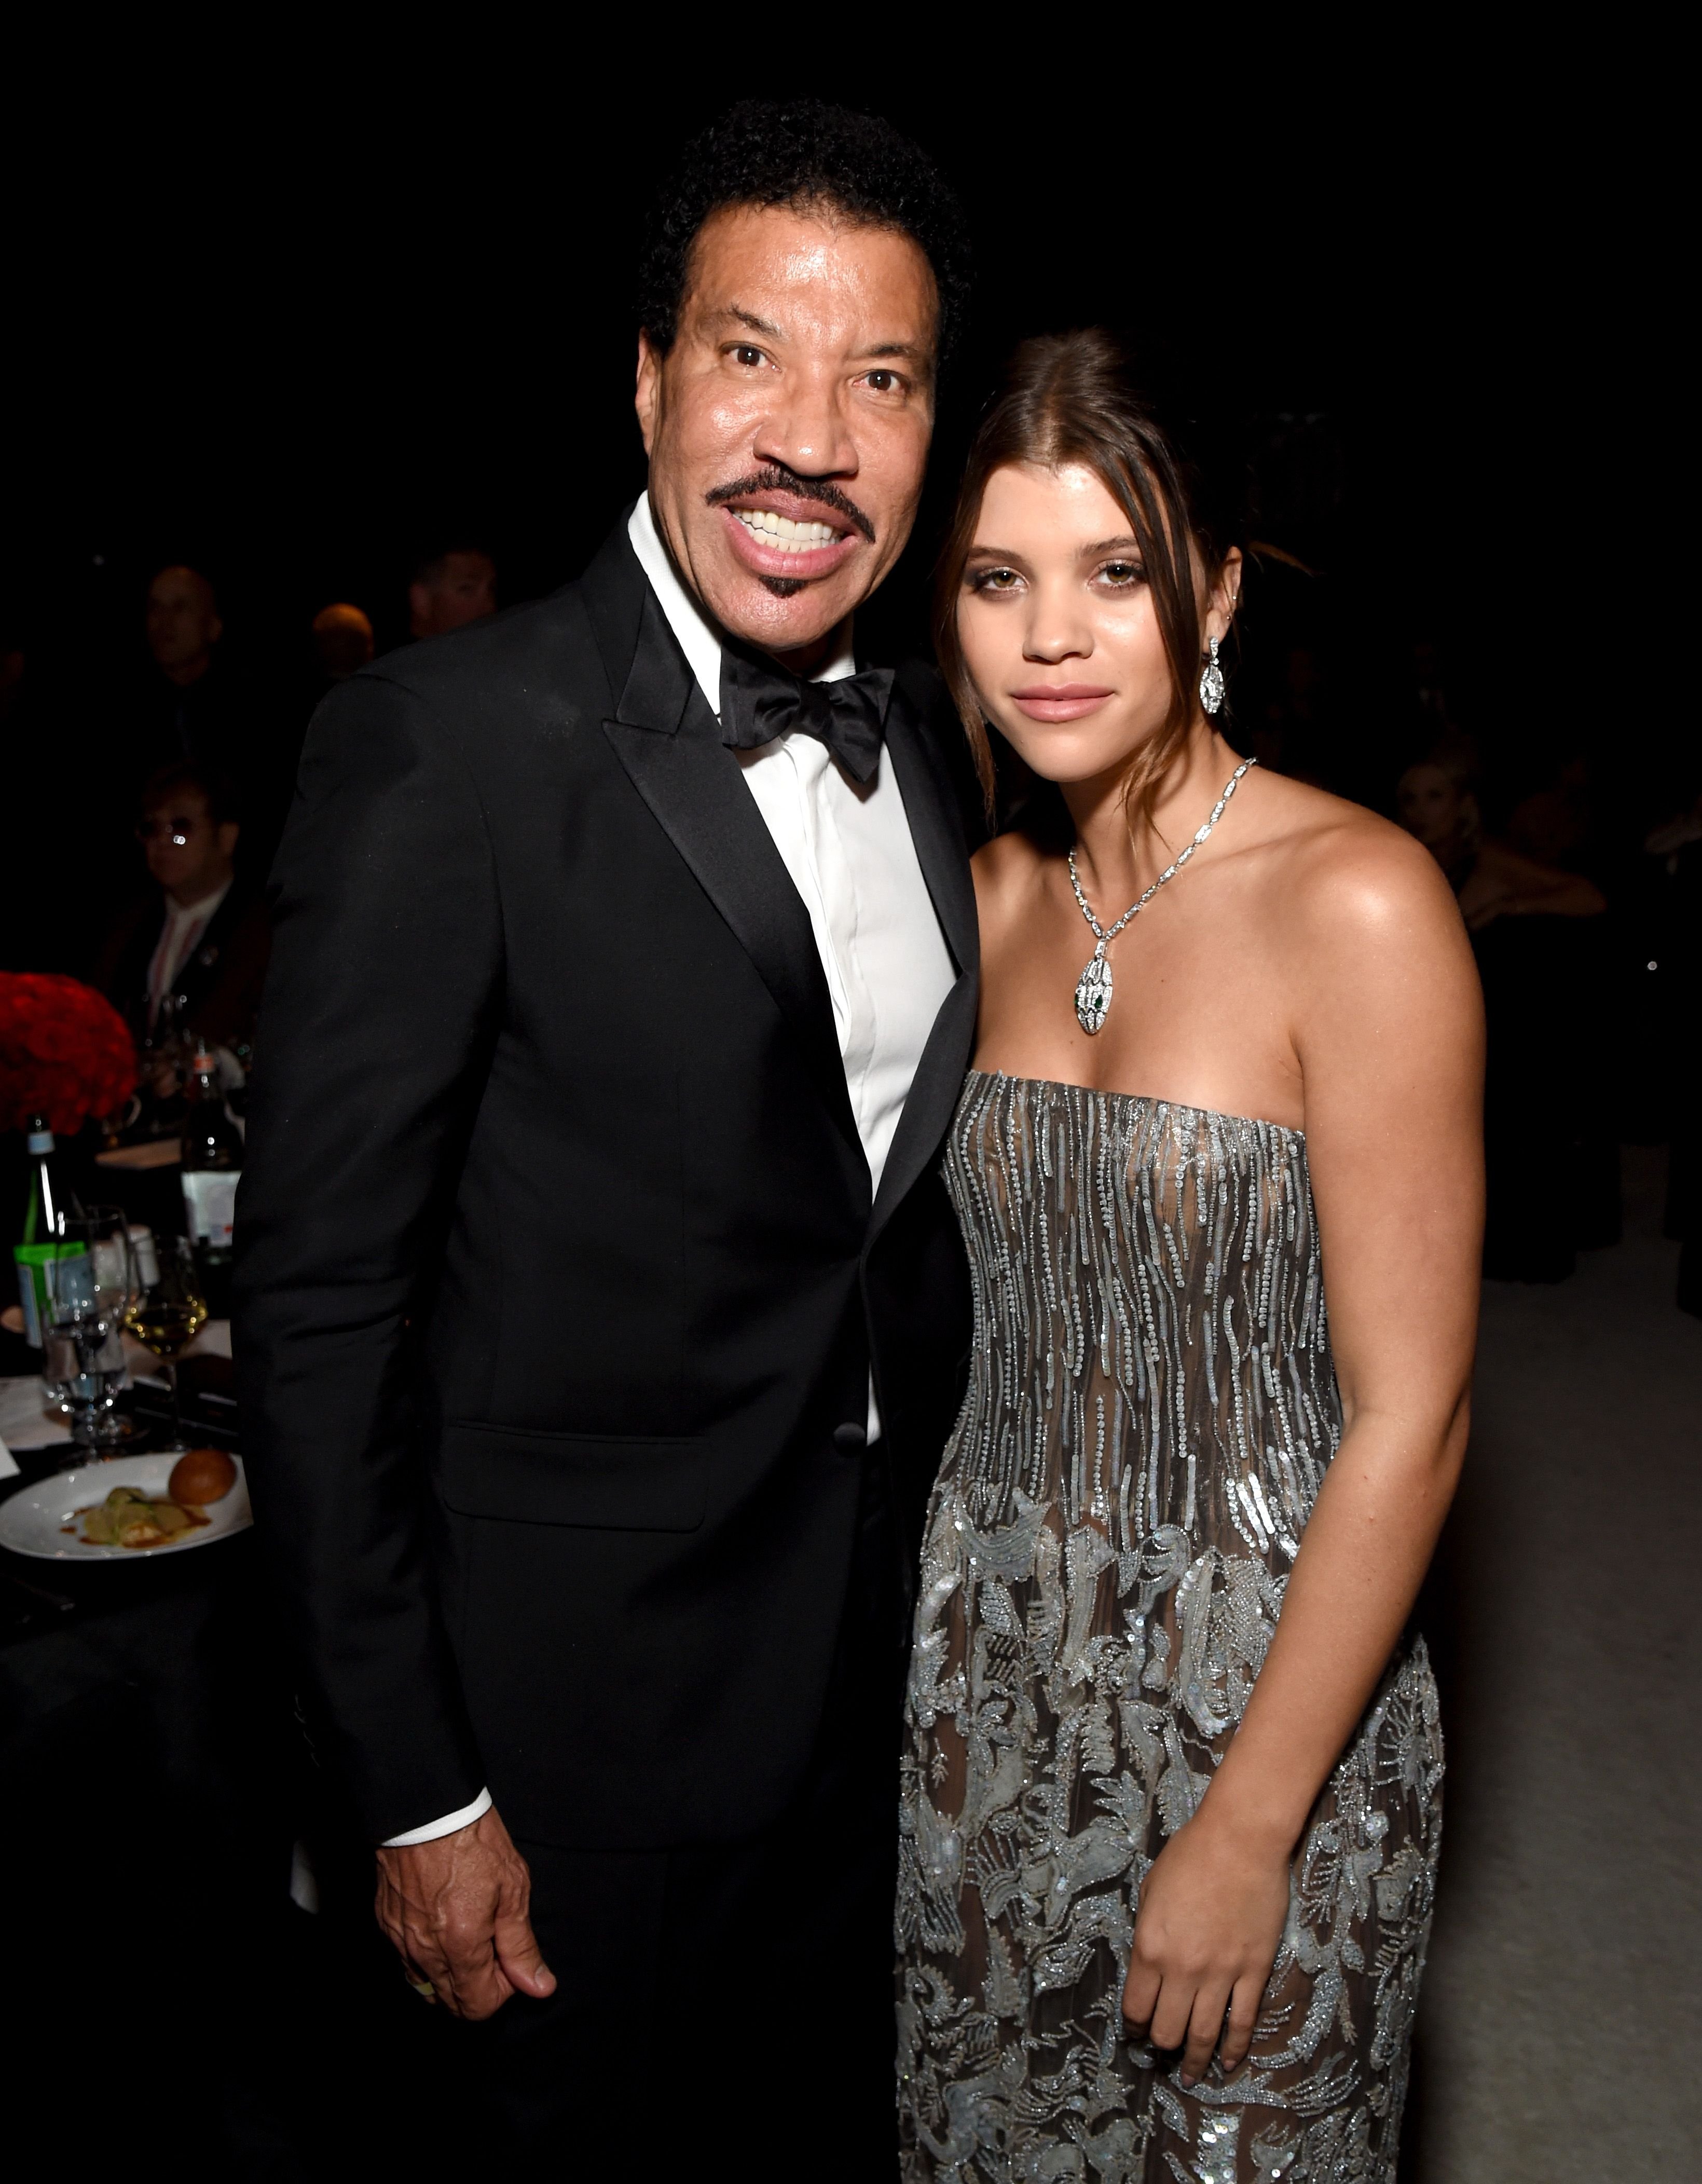 Lionel and Sofia Richie at the 26th annual Elton John AIDS Foundation Academy Awards Viewing Party on March 4, 2018, in West Hollywood, California | Photo: Michael Kovac/Getty Images